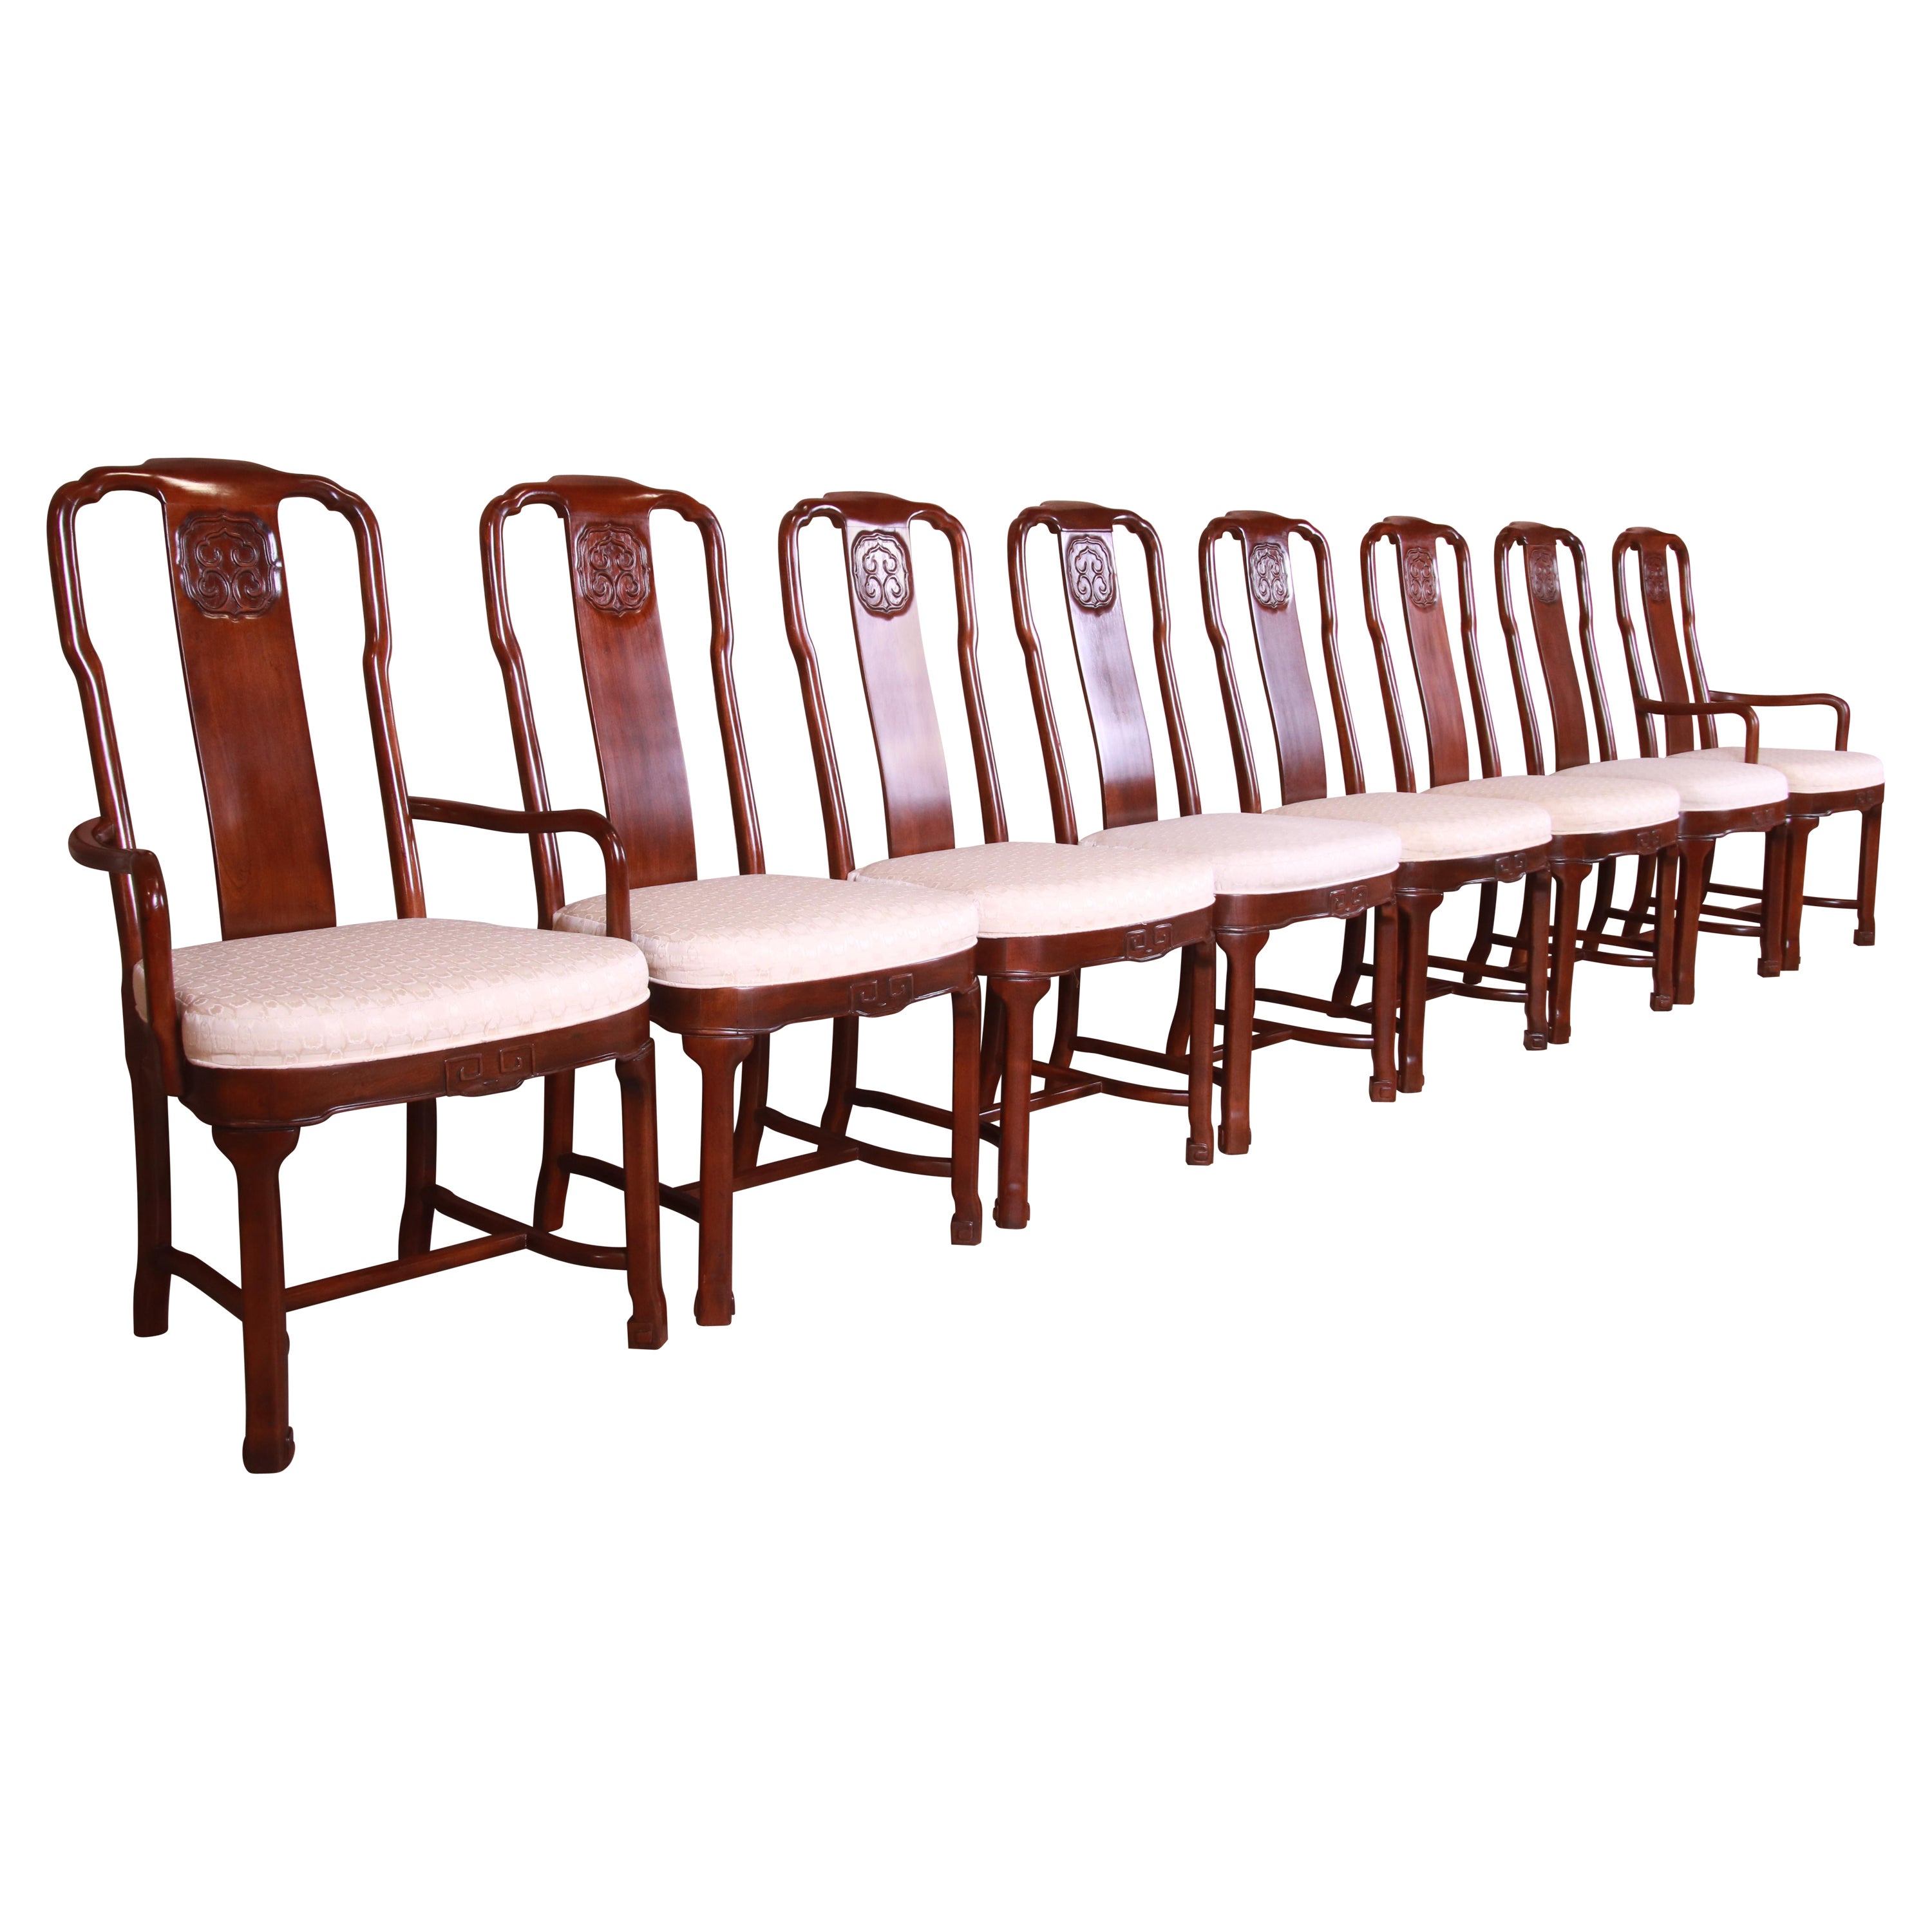 Drexel Heritage Hollywood Regency Chinoiserie Mahogany Dining Chairs, Set of 8